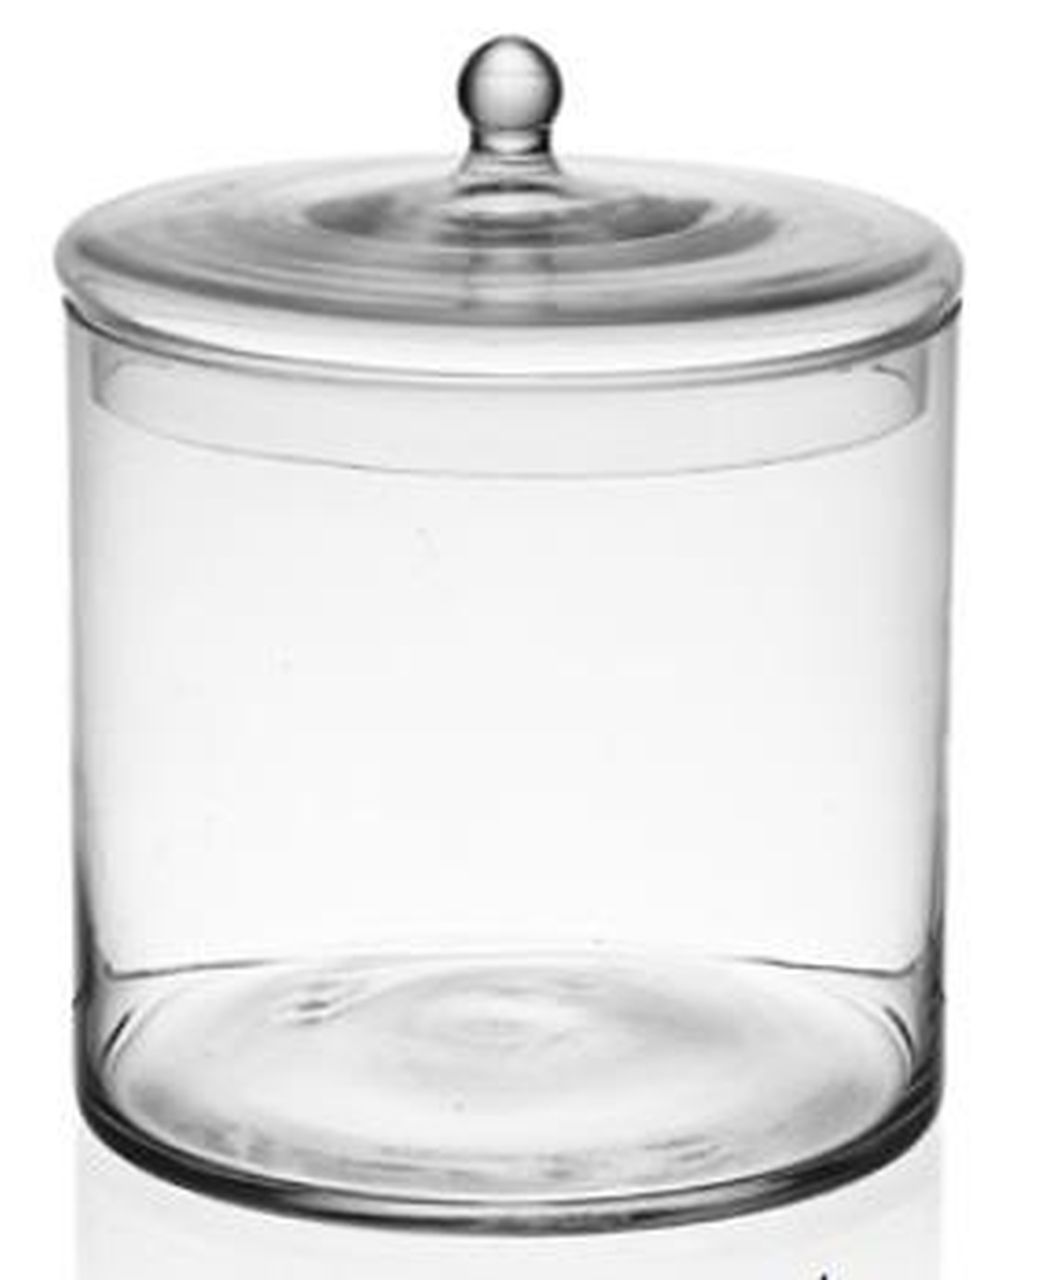 Big glass container for candy confetti